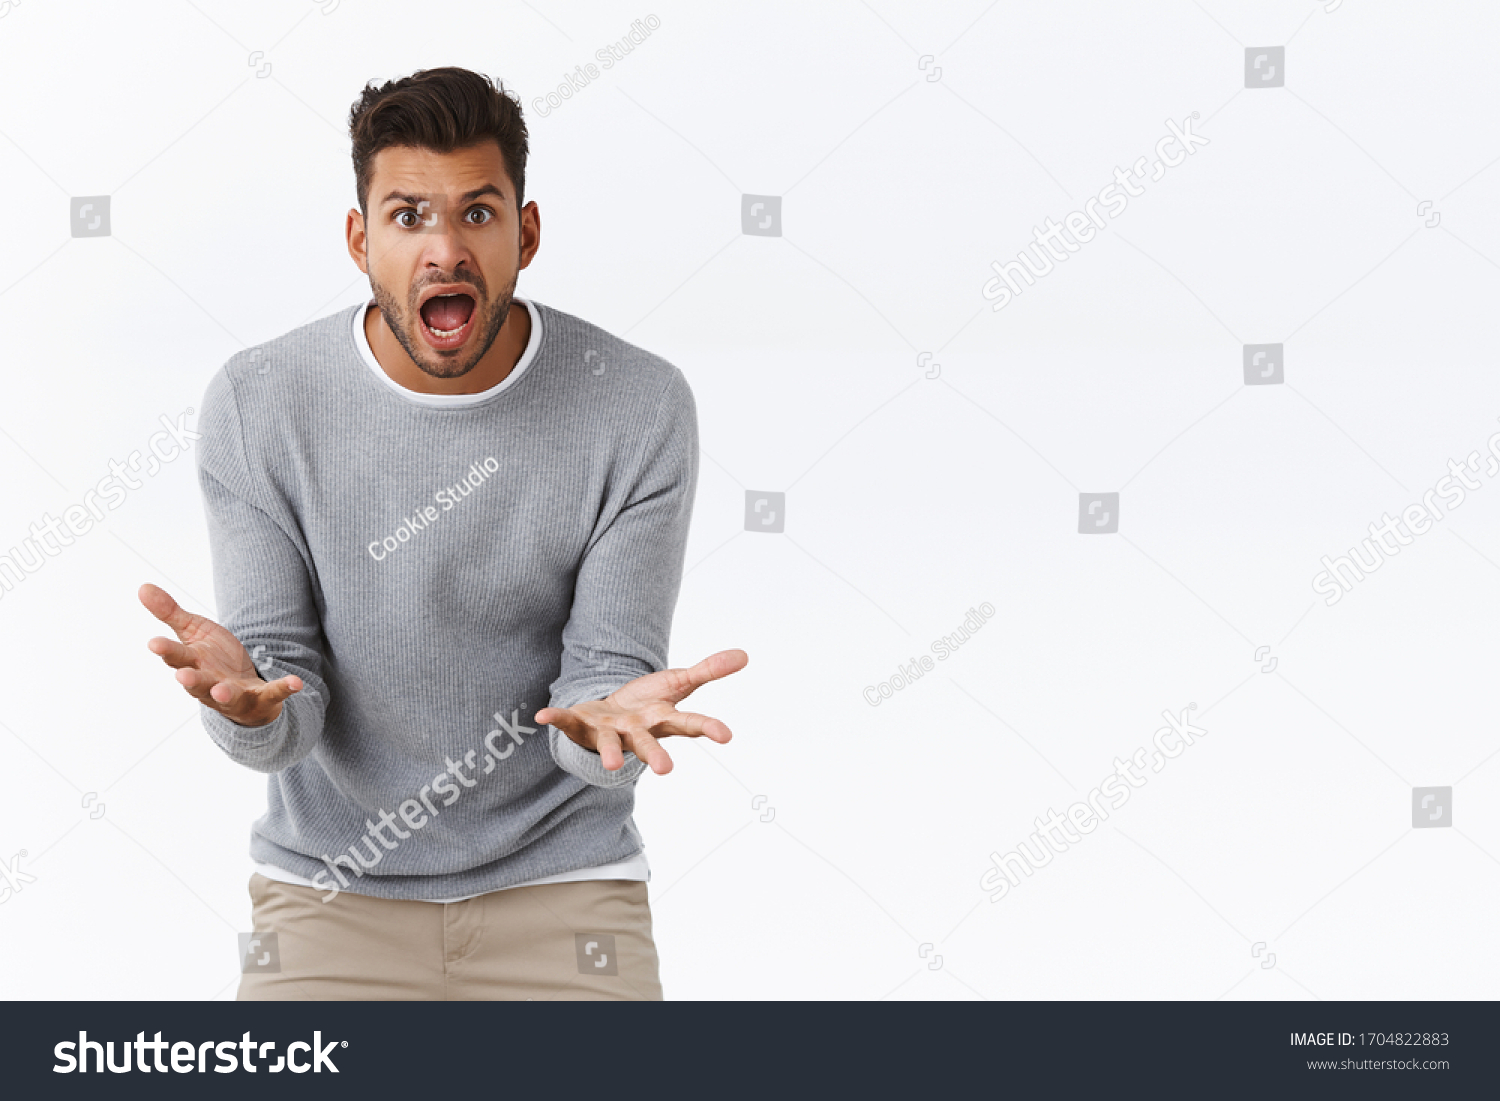 Man was let down yelling at friend how could he betray him, shaking hands in dismay and outraged, standing troubled and frustrated, standing white background bothered, cant figure out what problem #1704822883